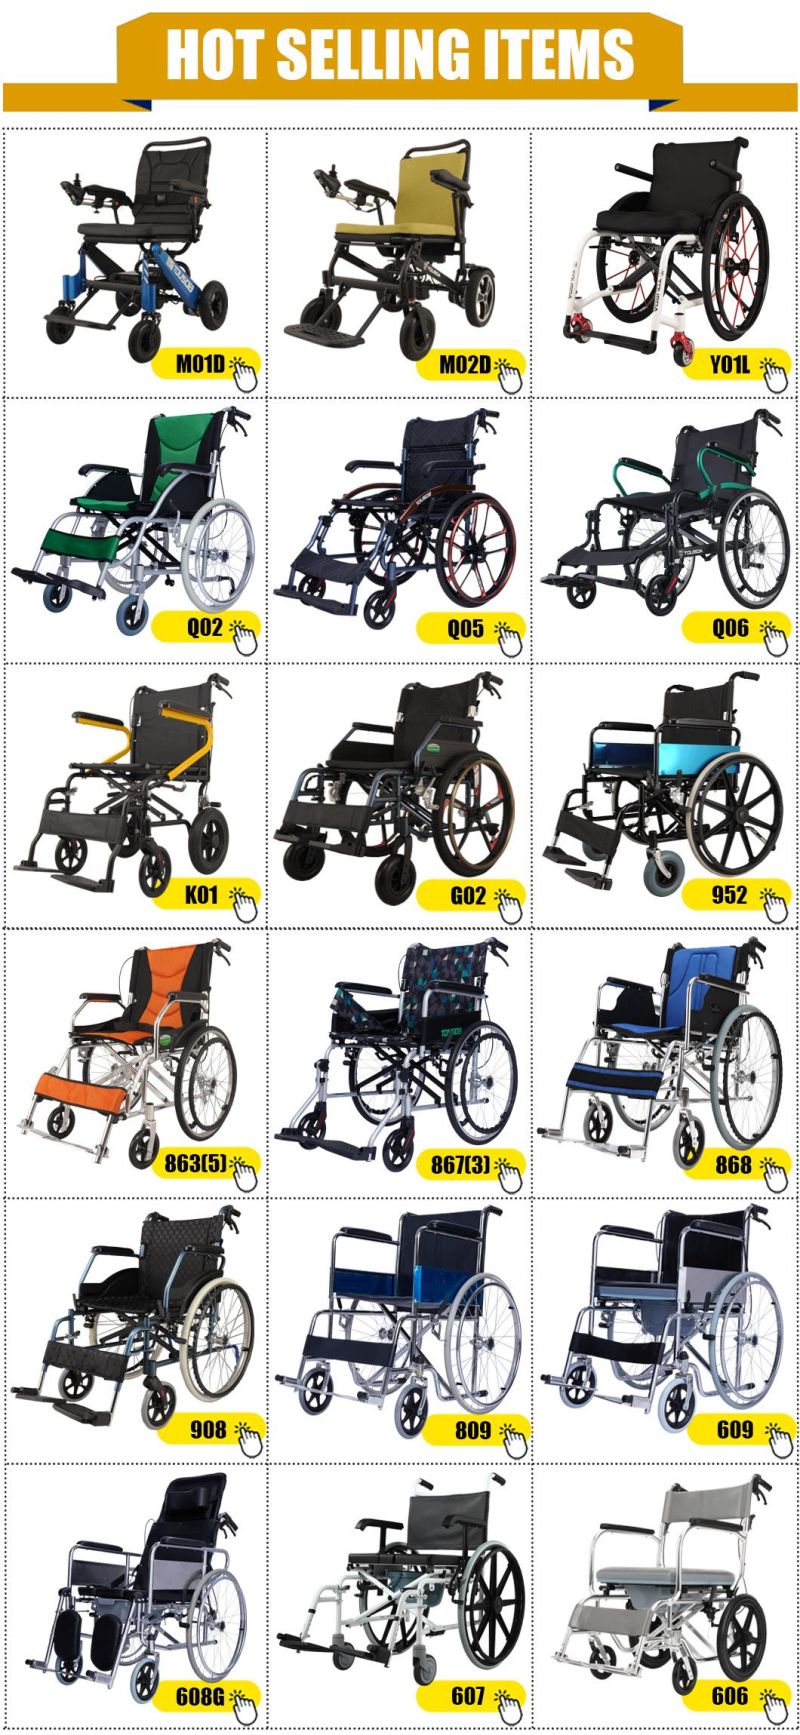 Foldable Aluminum Frame Bariatric Transport Disabled Wheelchair for Outdoor with CE